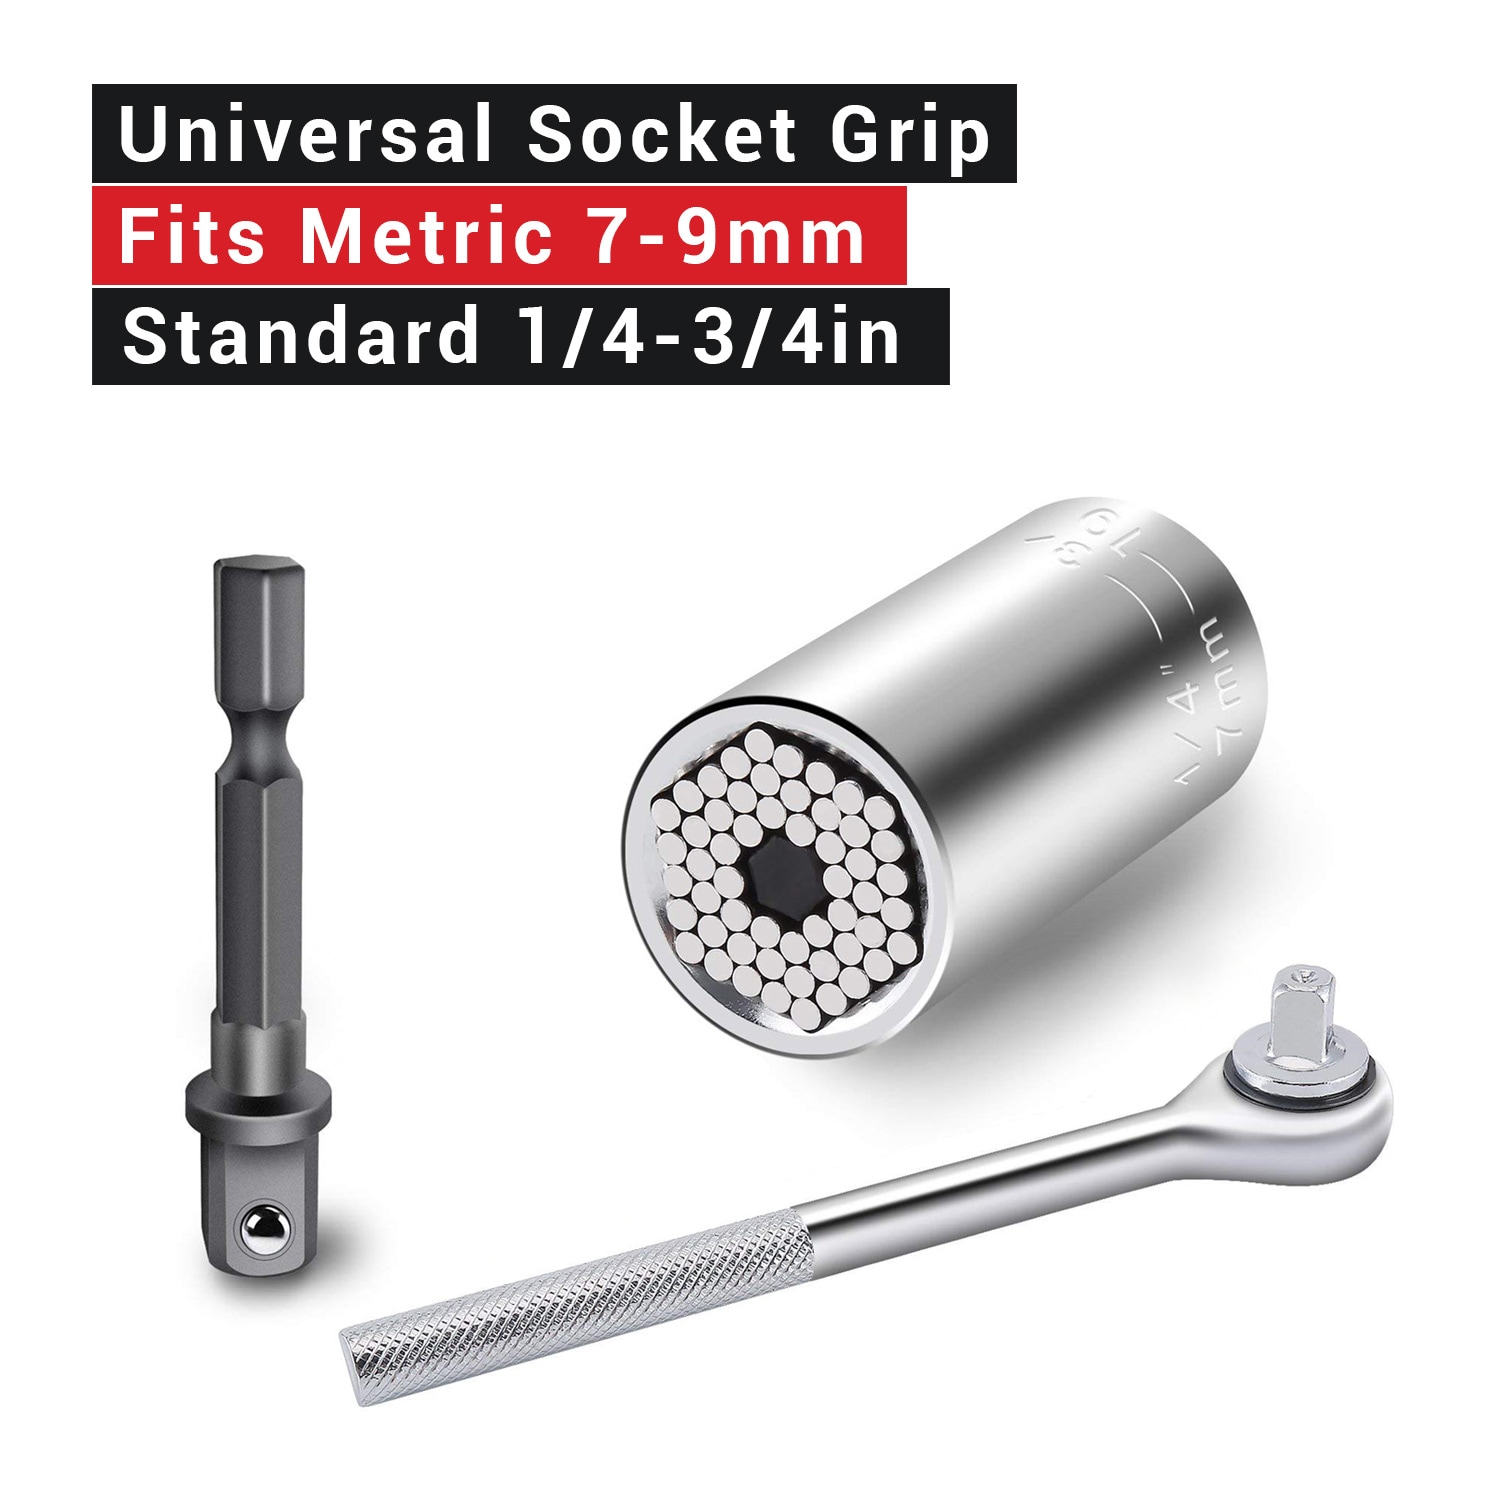 Universal New Socket Wrench Grip Magical Multi Tool All in One Adapter